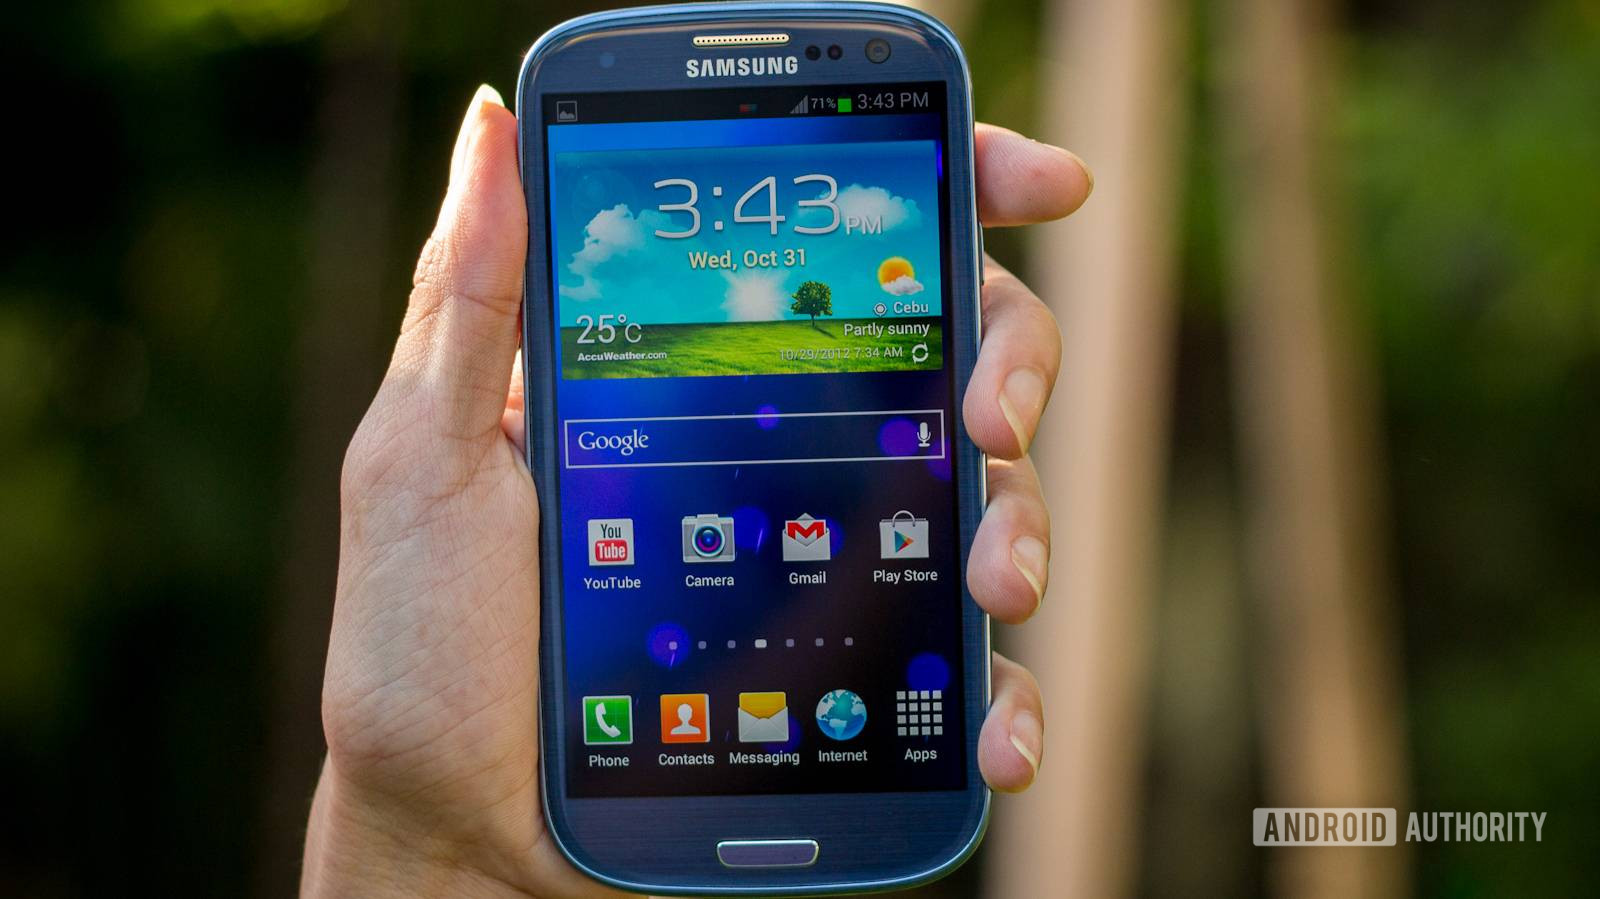 samsung galaxy s3 in hand with the screen on